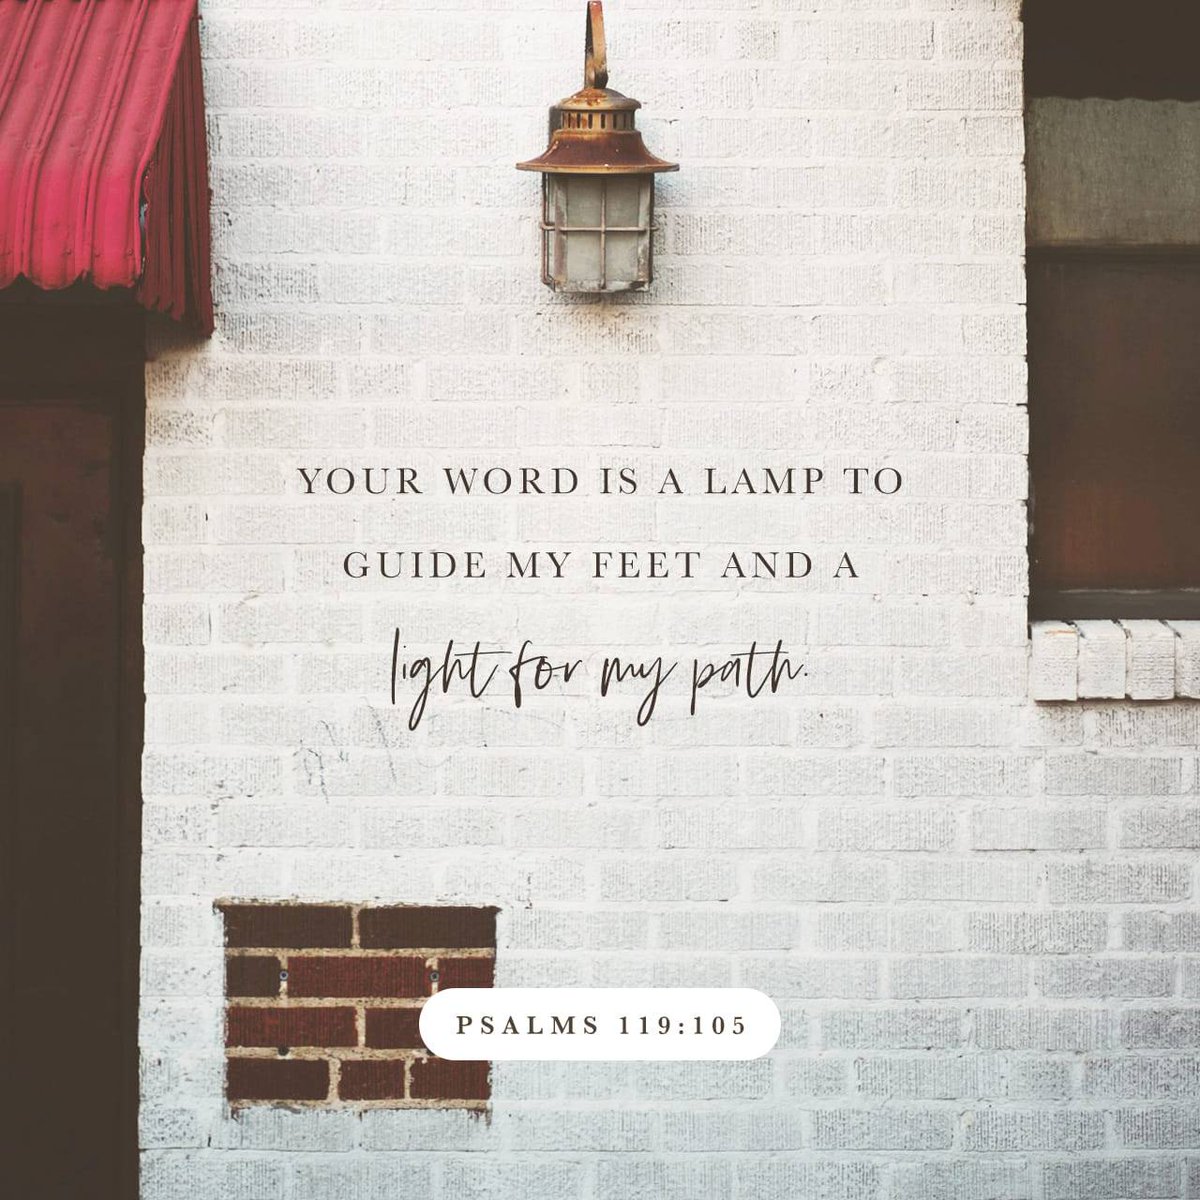 Psalm 119:105 ESV
Your word is a lamp to my feet and a light to my path.

bible.com/bible/59/psa.1…
#BibleVerse #VerseOfTheDay #WorshpLifestyle #WorshipLifestyle